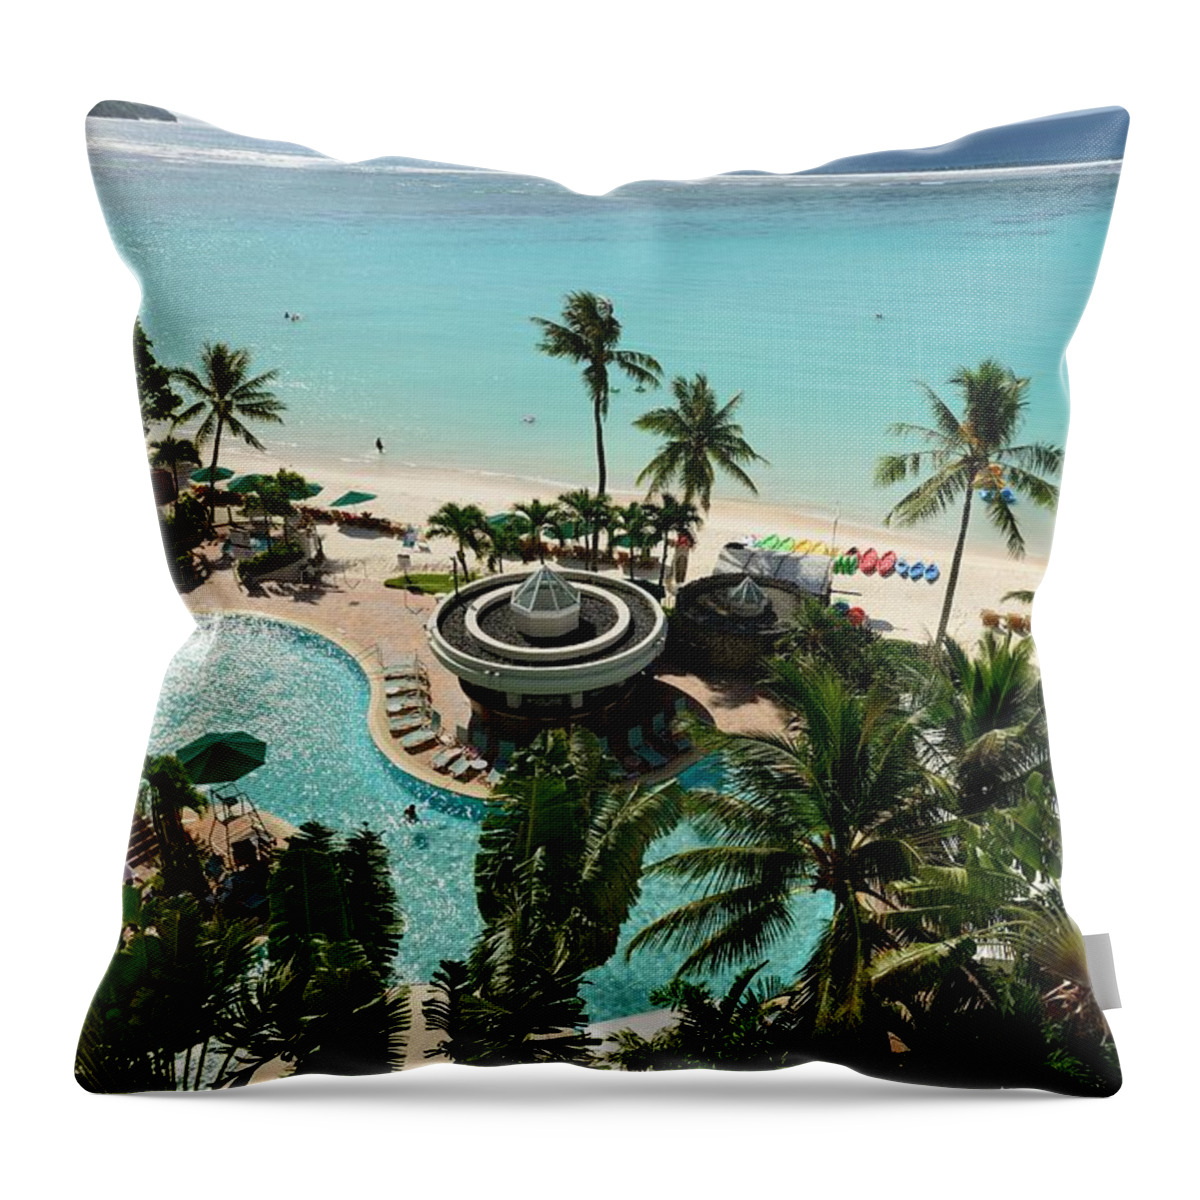 Taming Throw Pillow featuring the photograph The Beach View From Above by Michael Scott